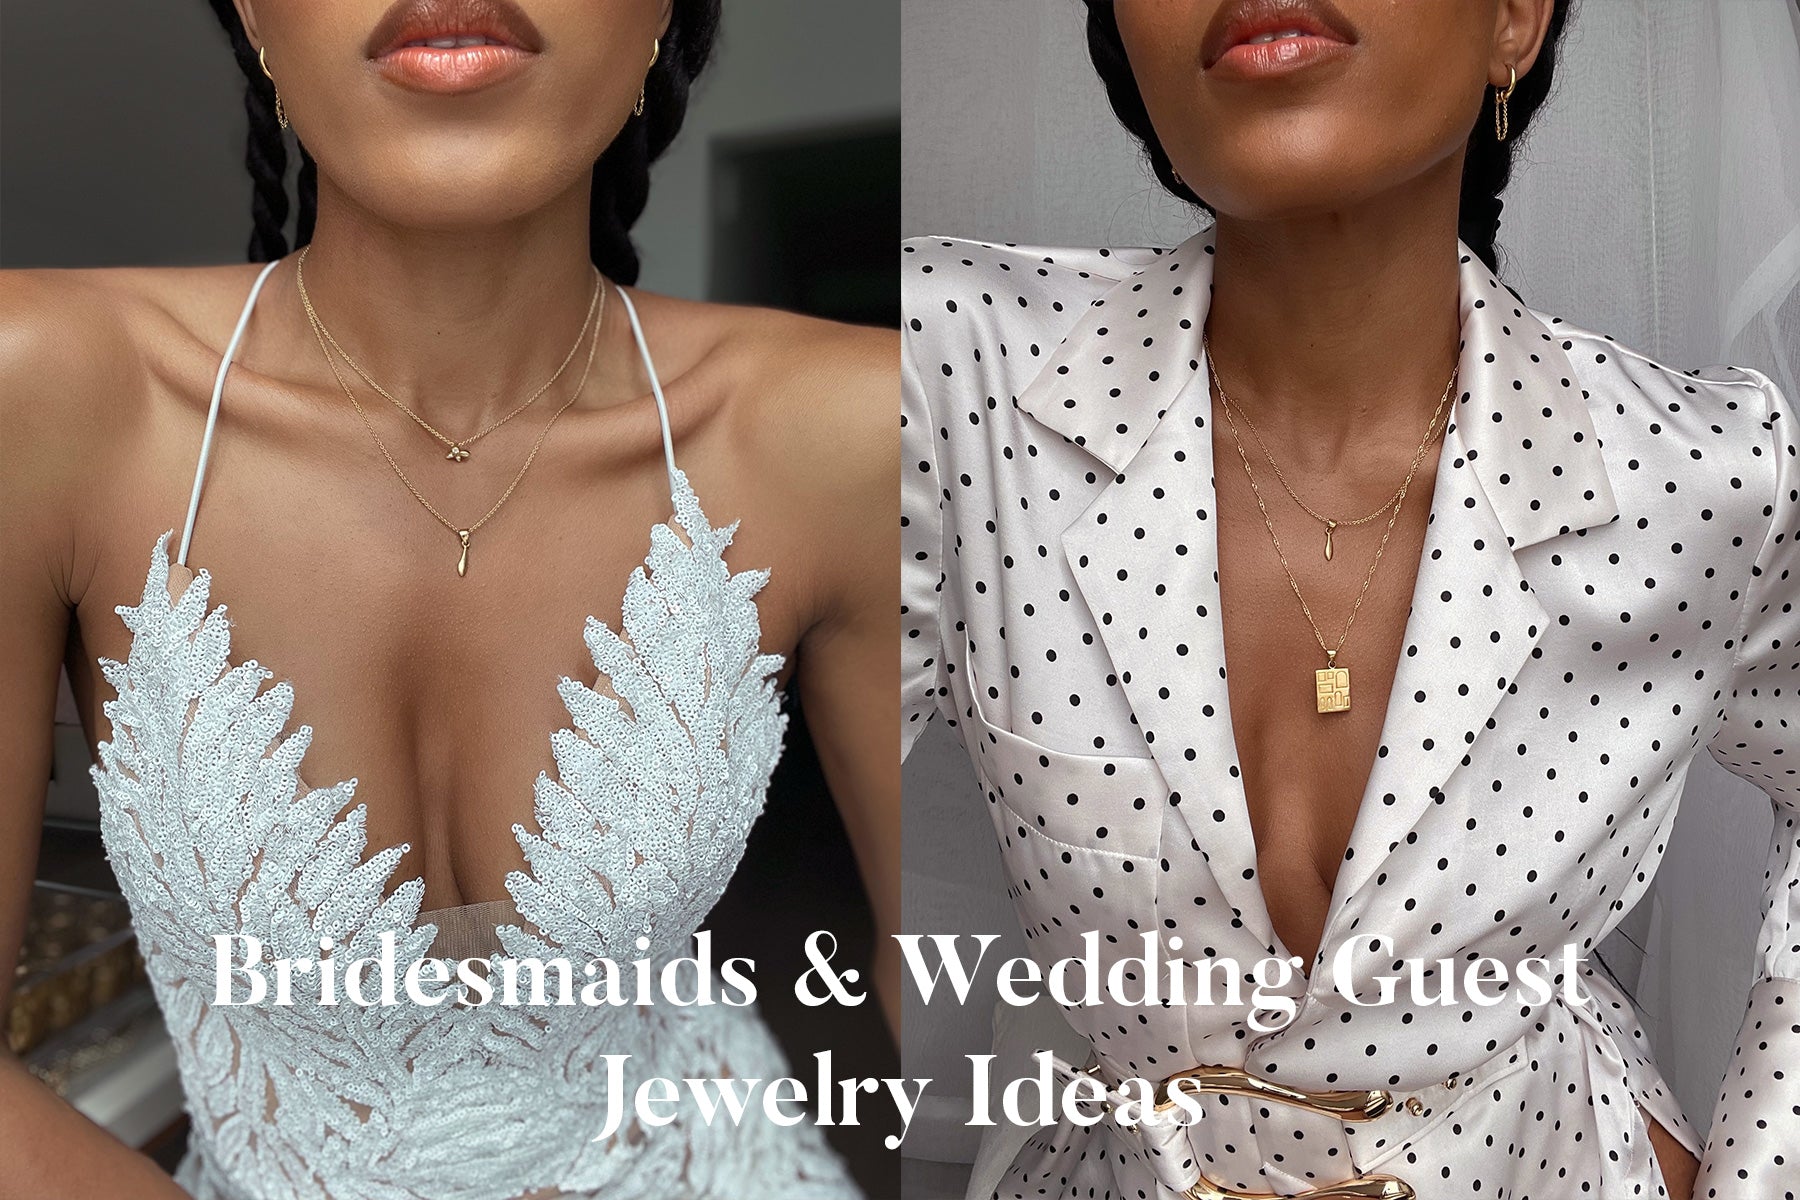 Bridesmaids & Wedding Guest Jewelry Ideas: How To Accessorize for a Wedding